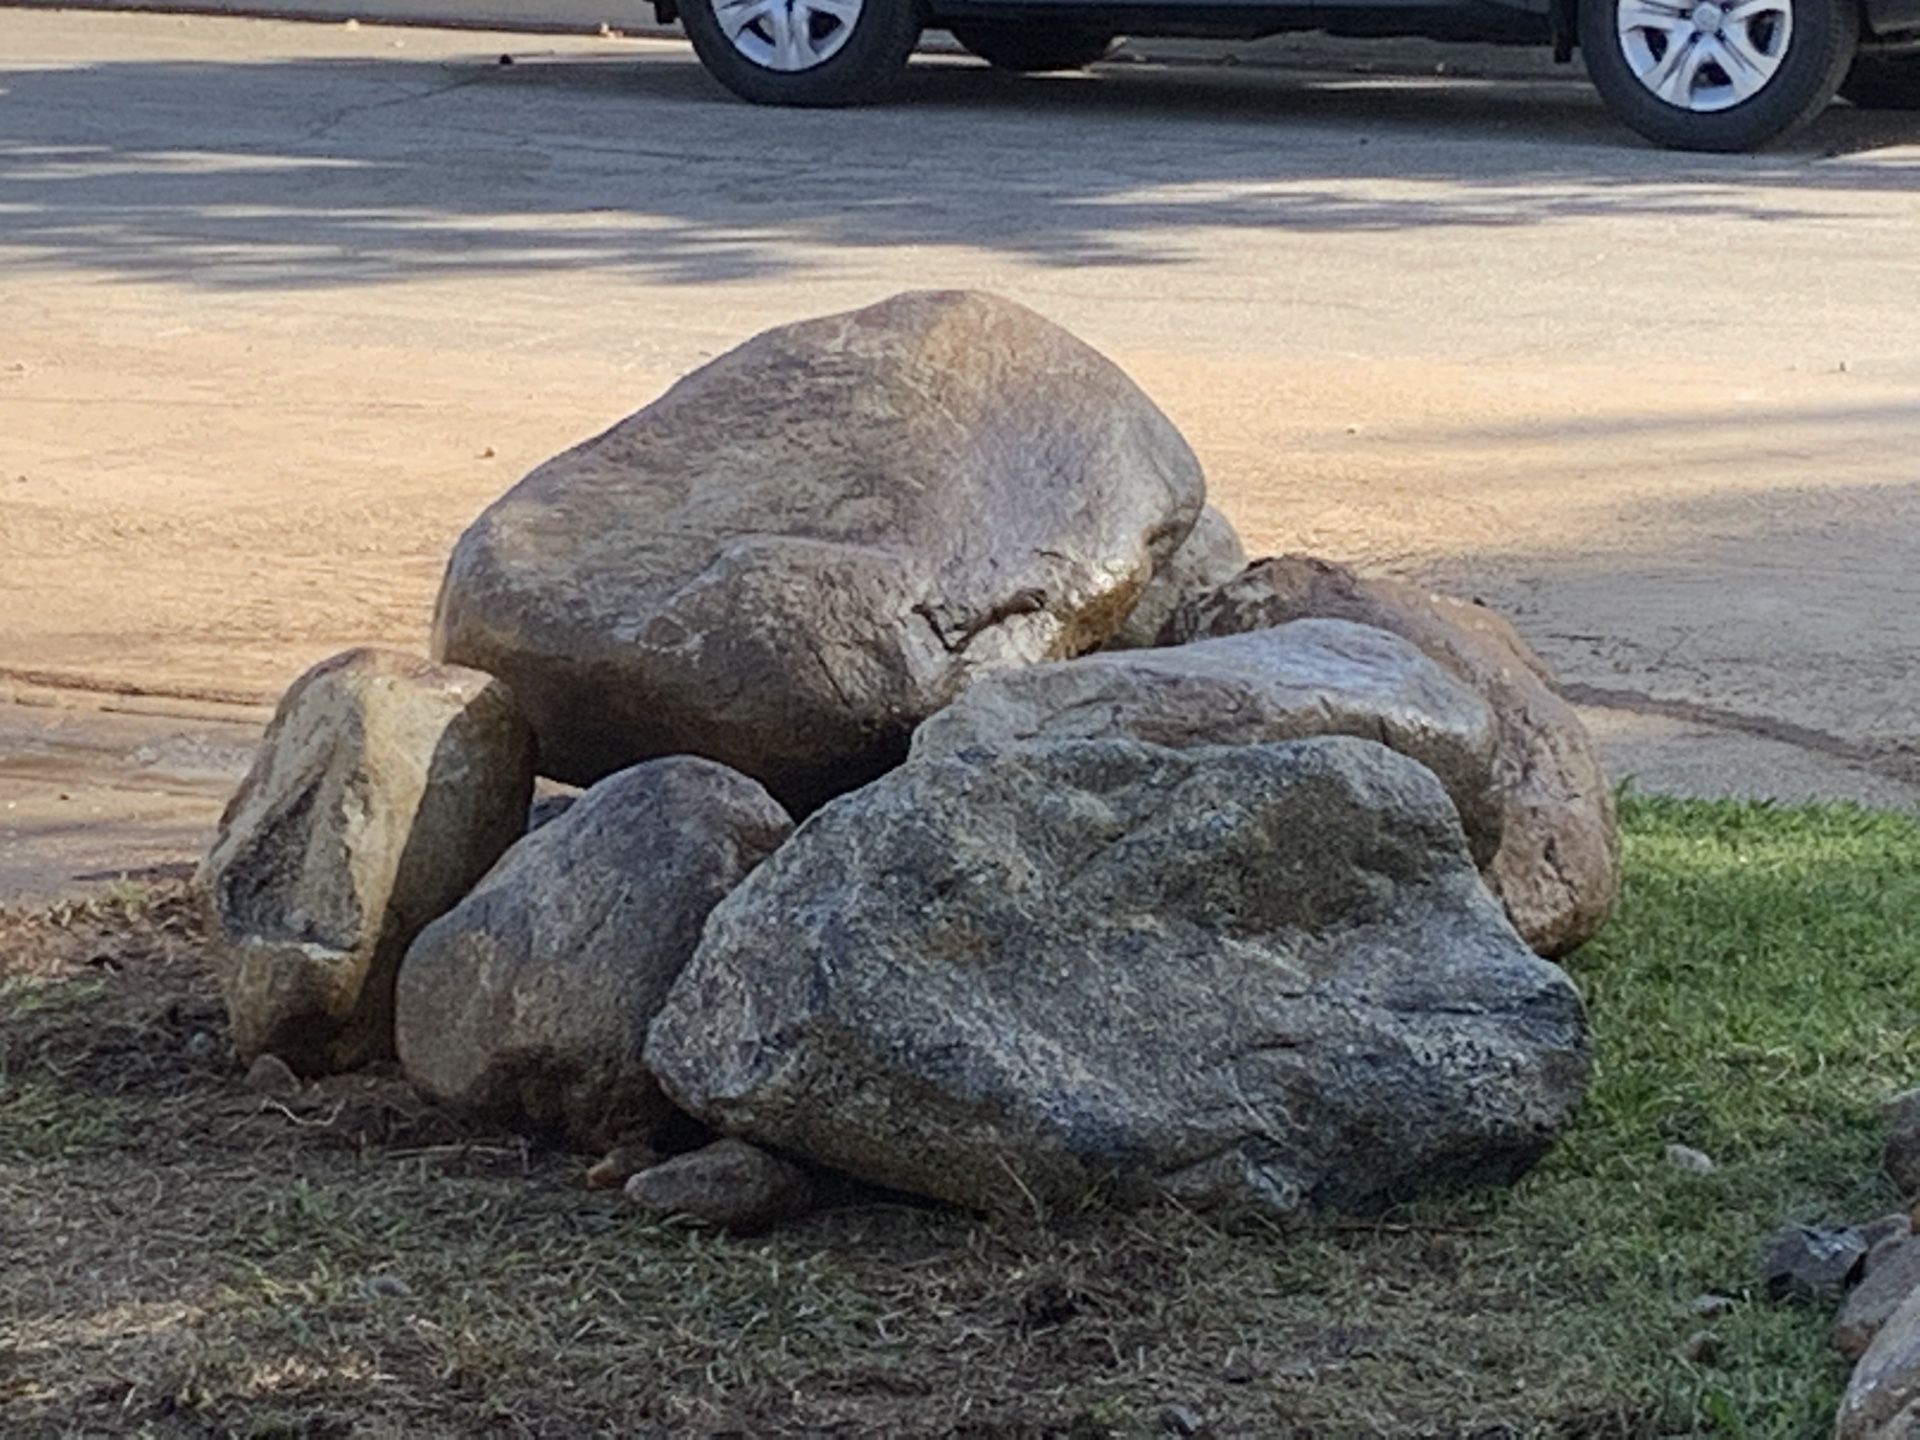 Free rocks today I can give you a hand Loading rocks with my tractor Tuesday December -1 - 8024 Rosebud St Rancho Cucamonga Rocks Curb Side Any Tim